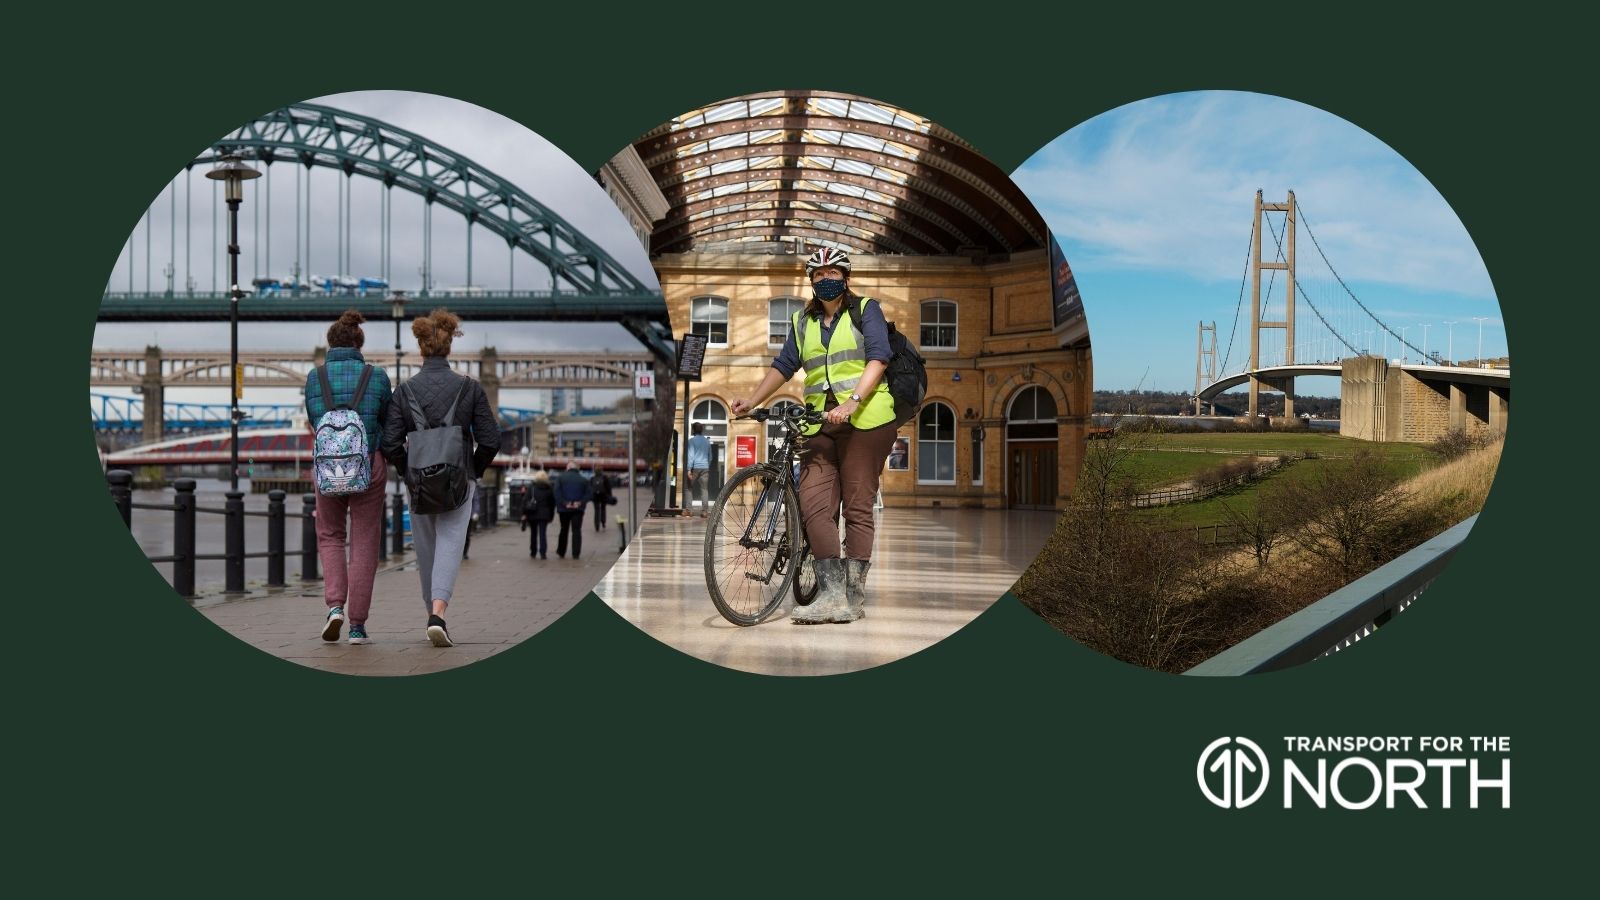 Pedestrians in Newcastle, cyclist at York station, and the Humber bridge